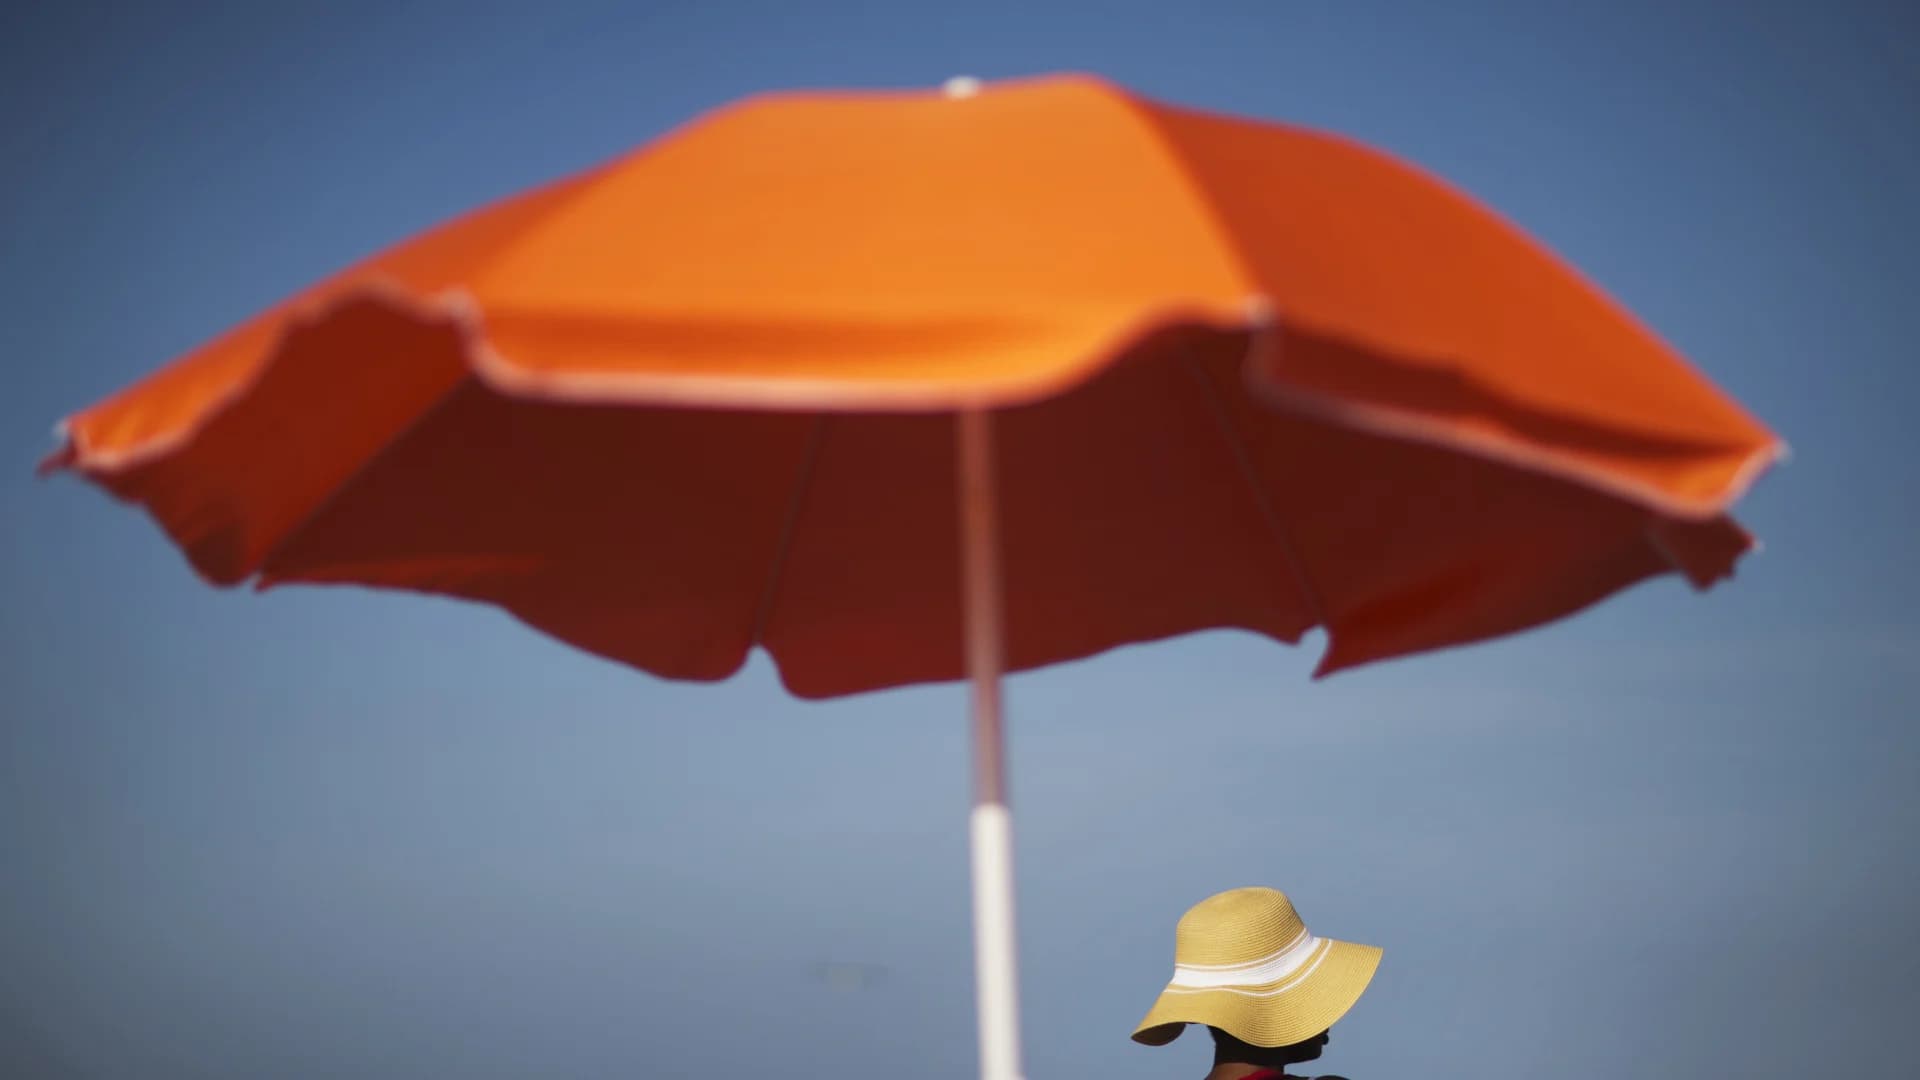 Love spending time in the sun? Here are 6 tips to protect your skin from sunburn